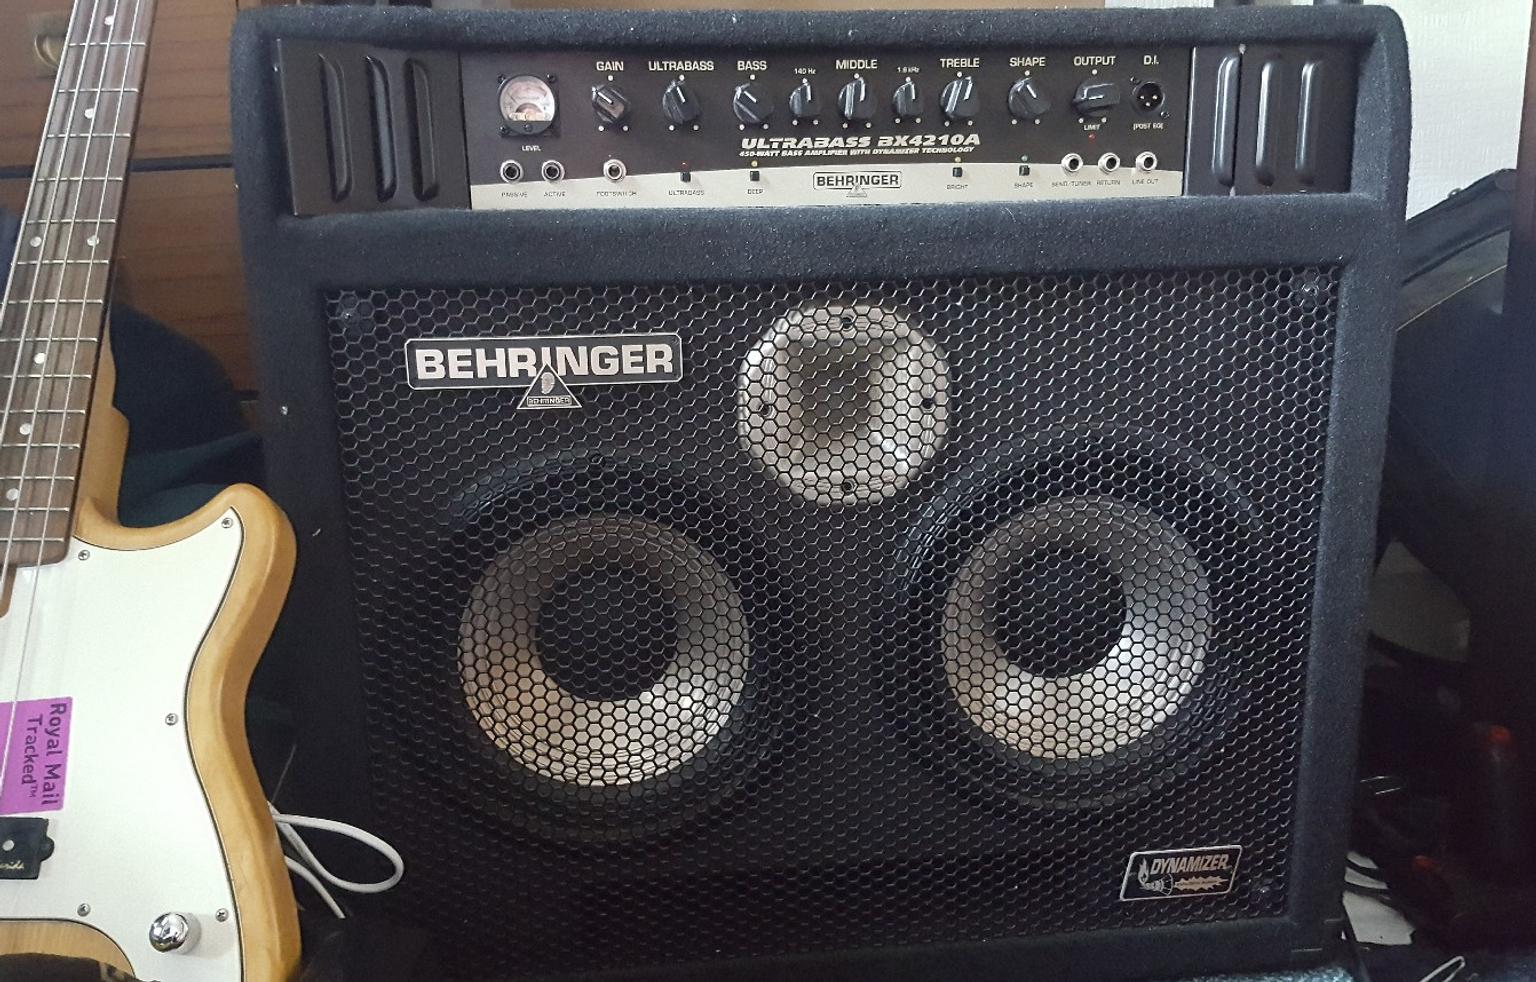 Bass Cab Behringer Bx4210 In Ch3 Chester For 90 00 For Sale Shpock